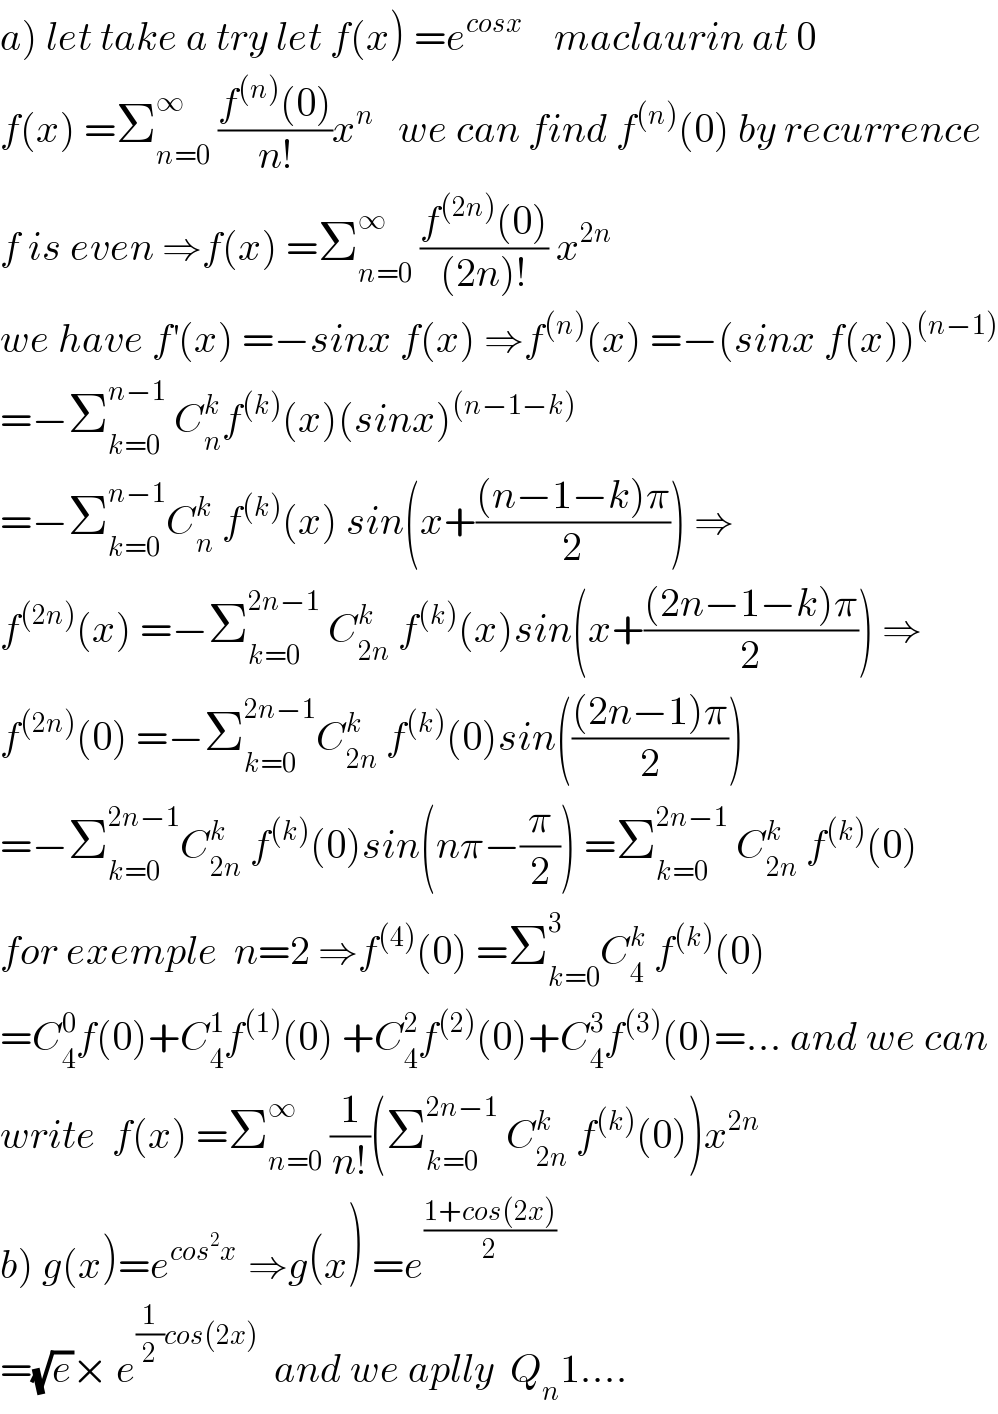 a) let take a try let f(x) =e^(cosx)     maclaurin at 0  f(x) =Σ_(n=0) ^∞  ((f^((n)) (0))/(n!))x^n    we can find f^((n)) (0) by recurrence  f is even ⇒f(x) =Σ_(n=0) ^∞  ((f^((2n)) (0))/((2n)!)) x^(2n)   we have f^′ (x) =−sinx f(x) ⇒f^((n)) (x) =−(sinx f(x))^((n−1))   =−Σ_(k=0) ^(n−1)  C_n ^k f^((k)) (x)(sinx)^((n−1−k))   =−Σ_(k=0) ^(n−1) C_n ^k  f^((k)) (x) sin(x+(((n−1−k)π)/2)) ⇒  f^((2n)) (x) =−Σ_(k=0) ^(2n−1)  C_(2n) ^k  f^((k)) (x)sin(x+(((2n−1−k)π)/2)) ⇒  f^((2n)) (0) =−Σ_(k=0) ^(2n−1) C_(2n) ^k  f^((k)) (0)sin((((2n−1)π)/2))  =−Σ_(k=0) ^(2n−1) C_(2n) ^k  f^((k)) (0)sin(nπ−(π/2)) =Σ_(k=0) ^(2n−1)  C_(2n) ^k  f^((k)) (0)  for exemple  n=2 ⇒f^((4)) (0) =Σ_(k=0) ^3 C_4 ^k  f^((k)) (0)  =C_4 ^0 f(0)+C_4 ^1 f^((1)) (0) +C_4 ^2 f^((2)) (0)+C_4 ^3 f^((3)) (0)=... and we can  write  f(x) =Σ_(n=0) ^∞  (1/(n!))(Σ_(k=0) ^(2n−1)  C_(2n) ^k  f^((k)) (0))x^(2n)   b) g(x)=e^(cos^2 x )  ⇒g(x) =e^((1+cos(2x))/2)   =(√e)× e^((1/2)cos(2x))   and we aplly  Q_n 1....  